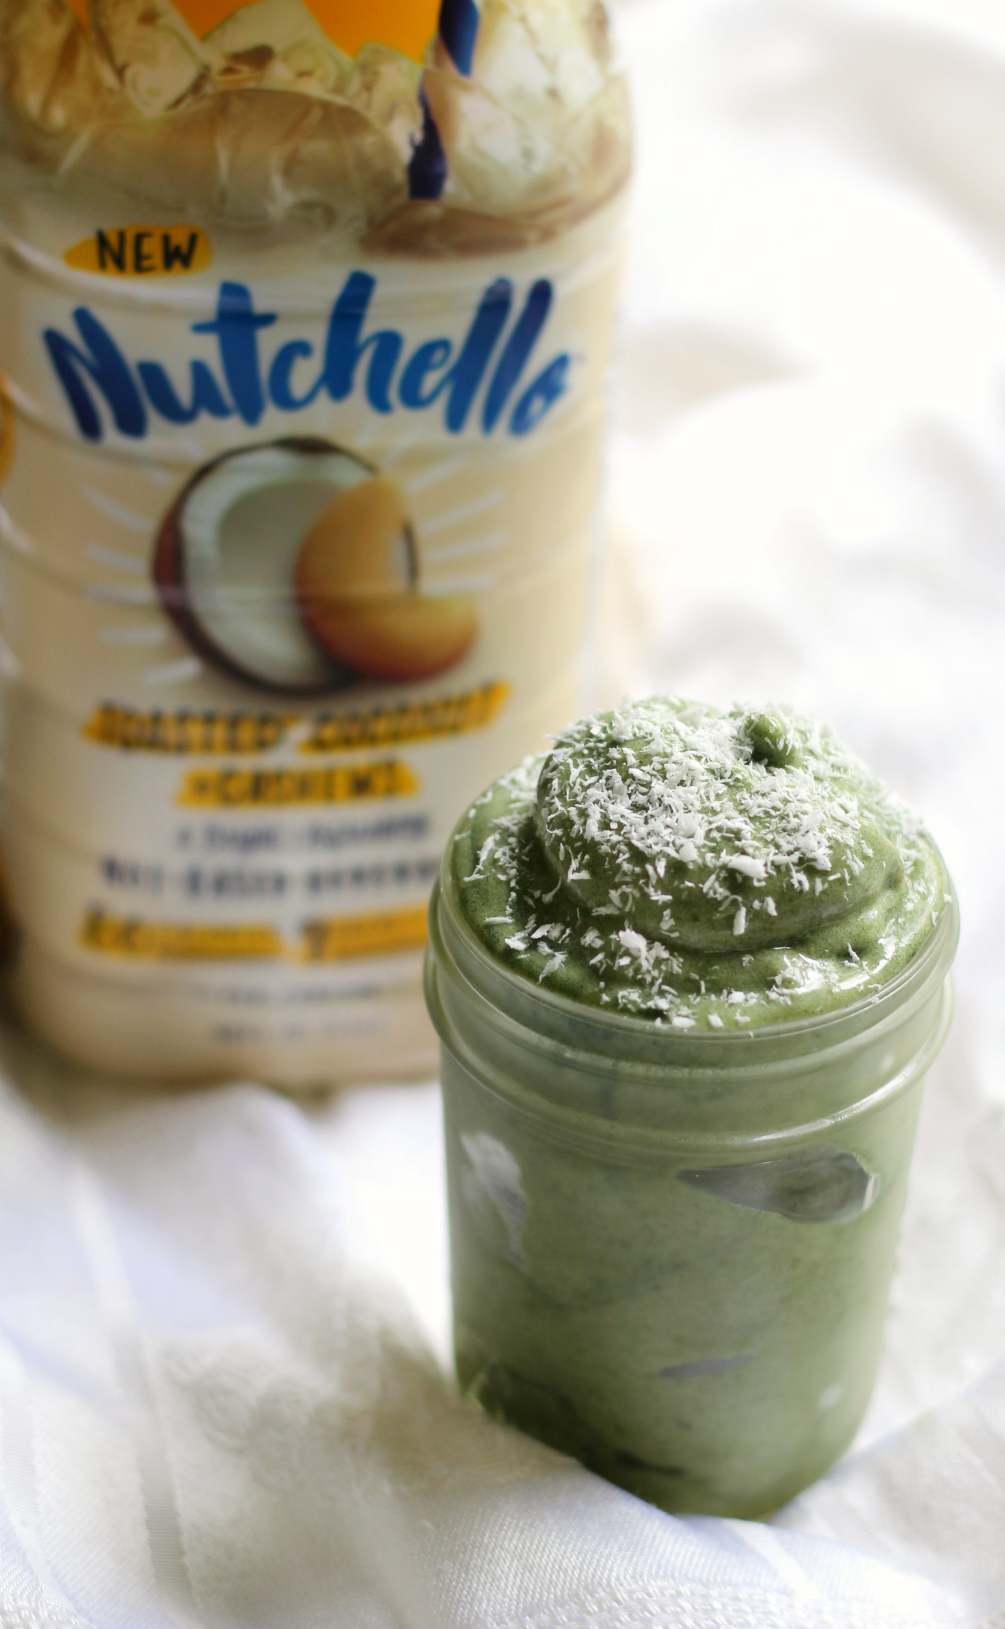 Coconut Matcha Ice Cream | Strength and Sunshine @RebeccaGF666 Your healthy ice cream dreams have come true! This creamy coconut matcha ice cream is gluten-free, vegan, paleo, and packed with superfood nutrients. A delicious dessert recipe you can whip up in a flash; no freezing or ice cream maker required!